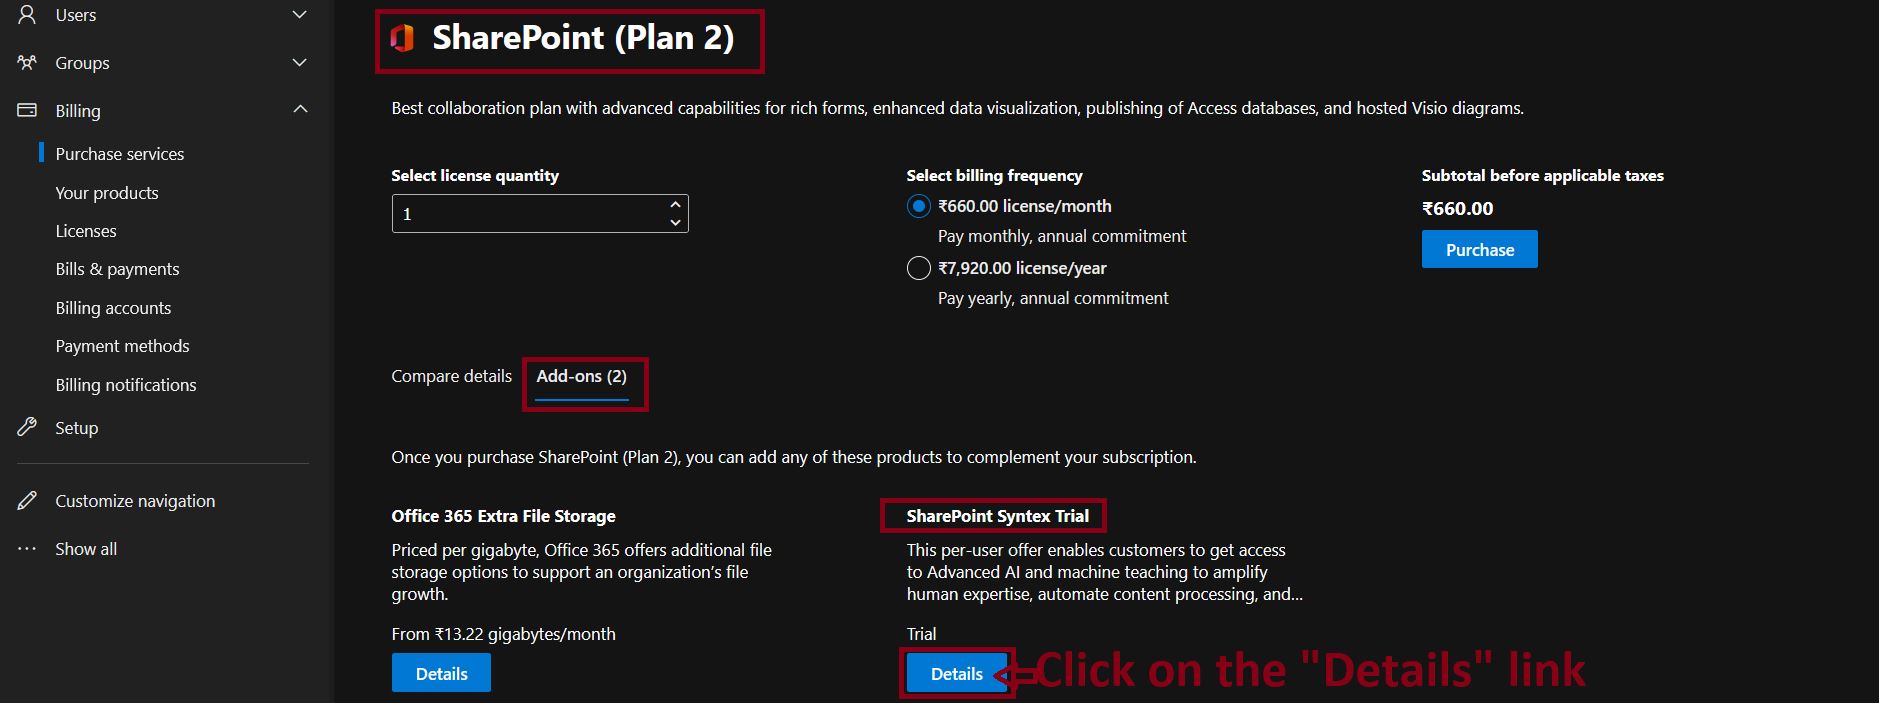 SharePoint Syntex Trial Add-in - SharePoint Plan 2